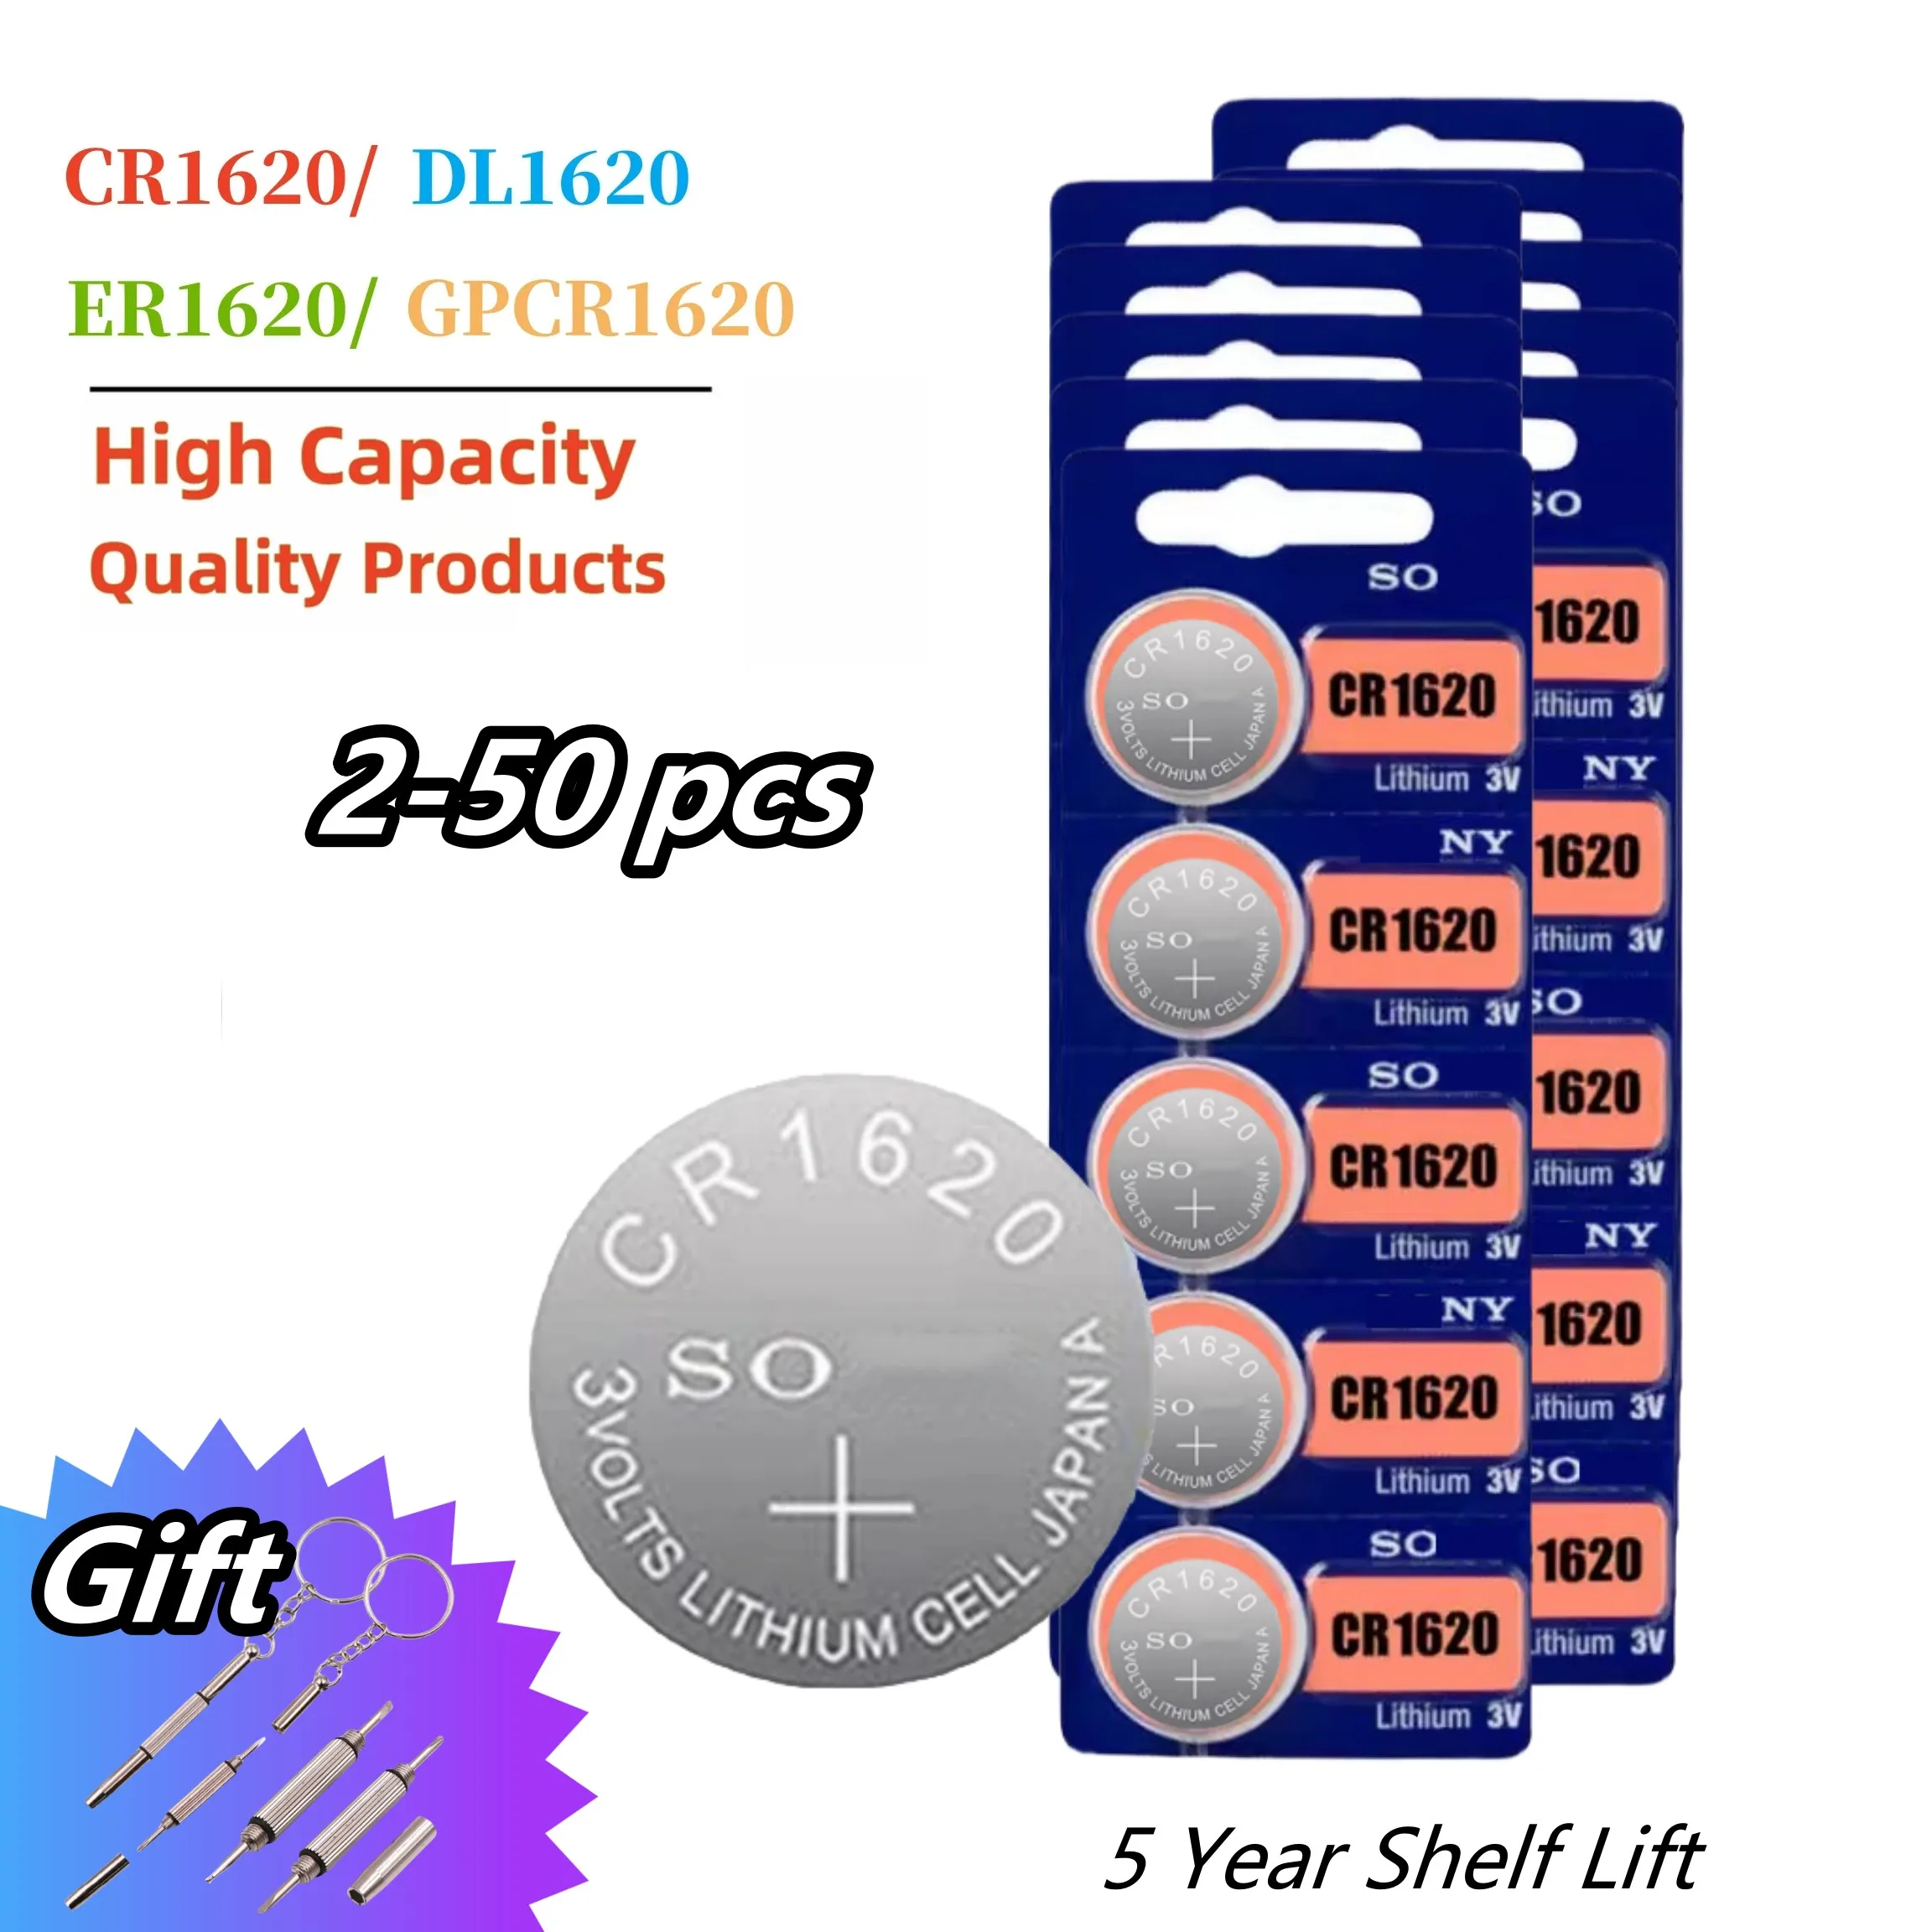 

2-50PCS Original For SONY CR1620 Button Battery Cr 1620 ECR1620 3v Lithium Battery for Videocamera PDA MP3 Watch Car Remote Key